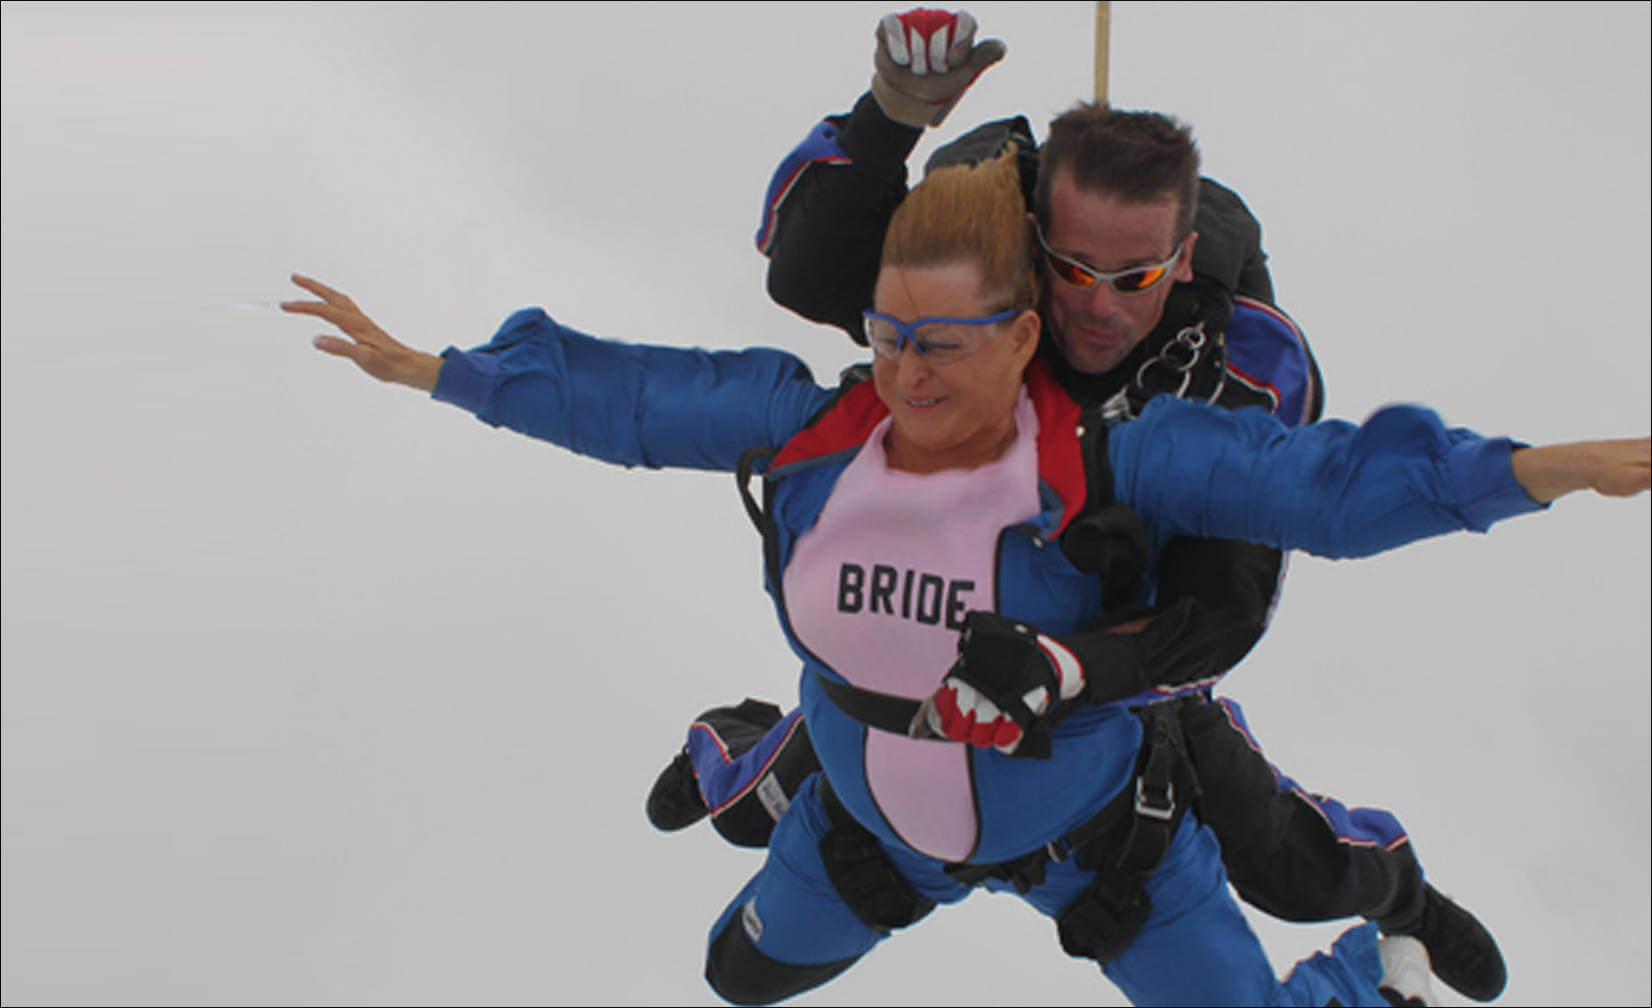 skydives following her 2011 wedding